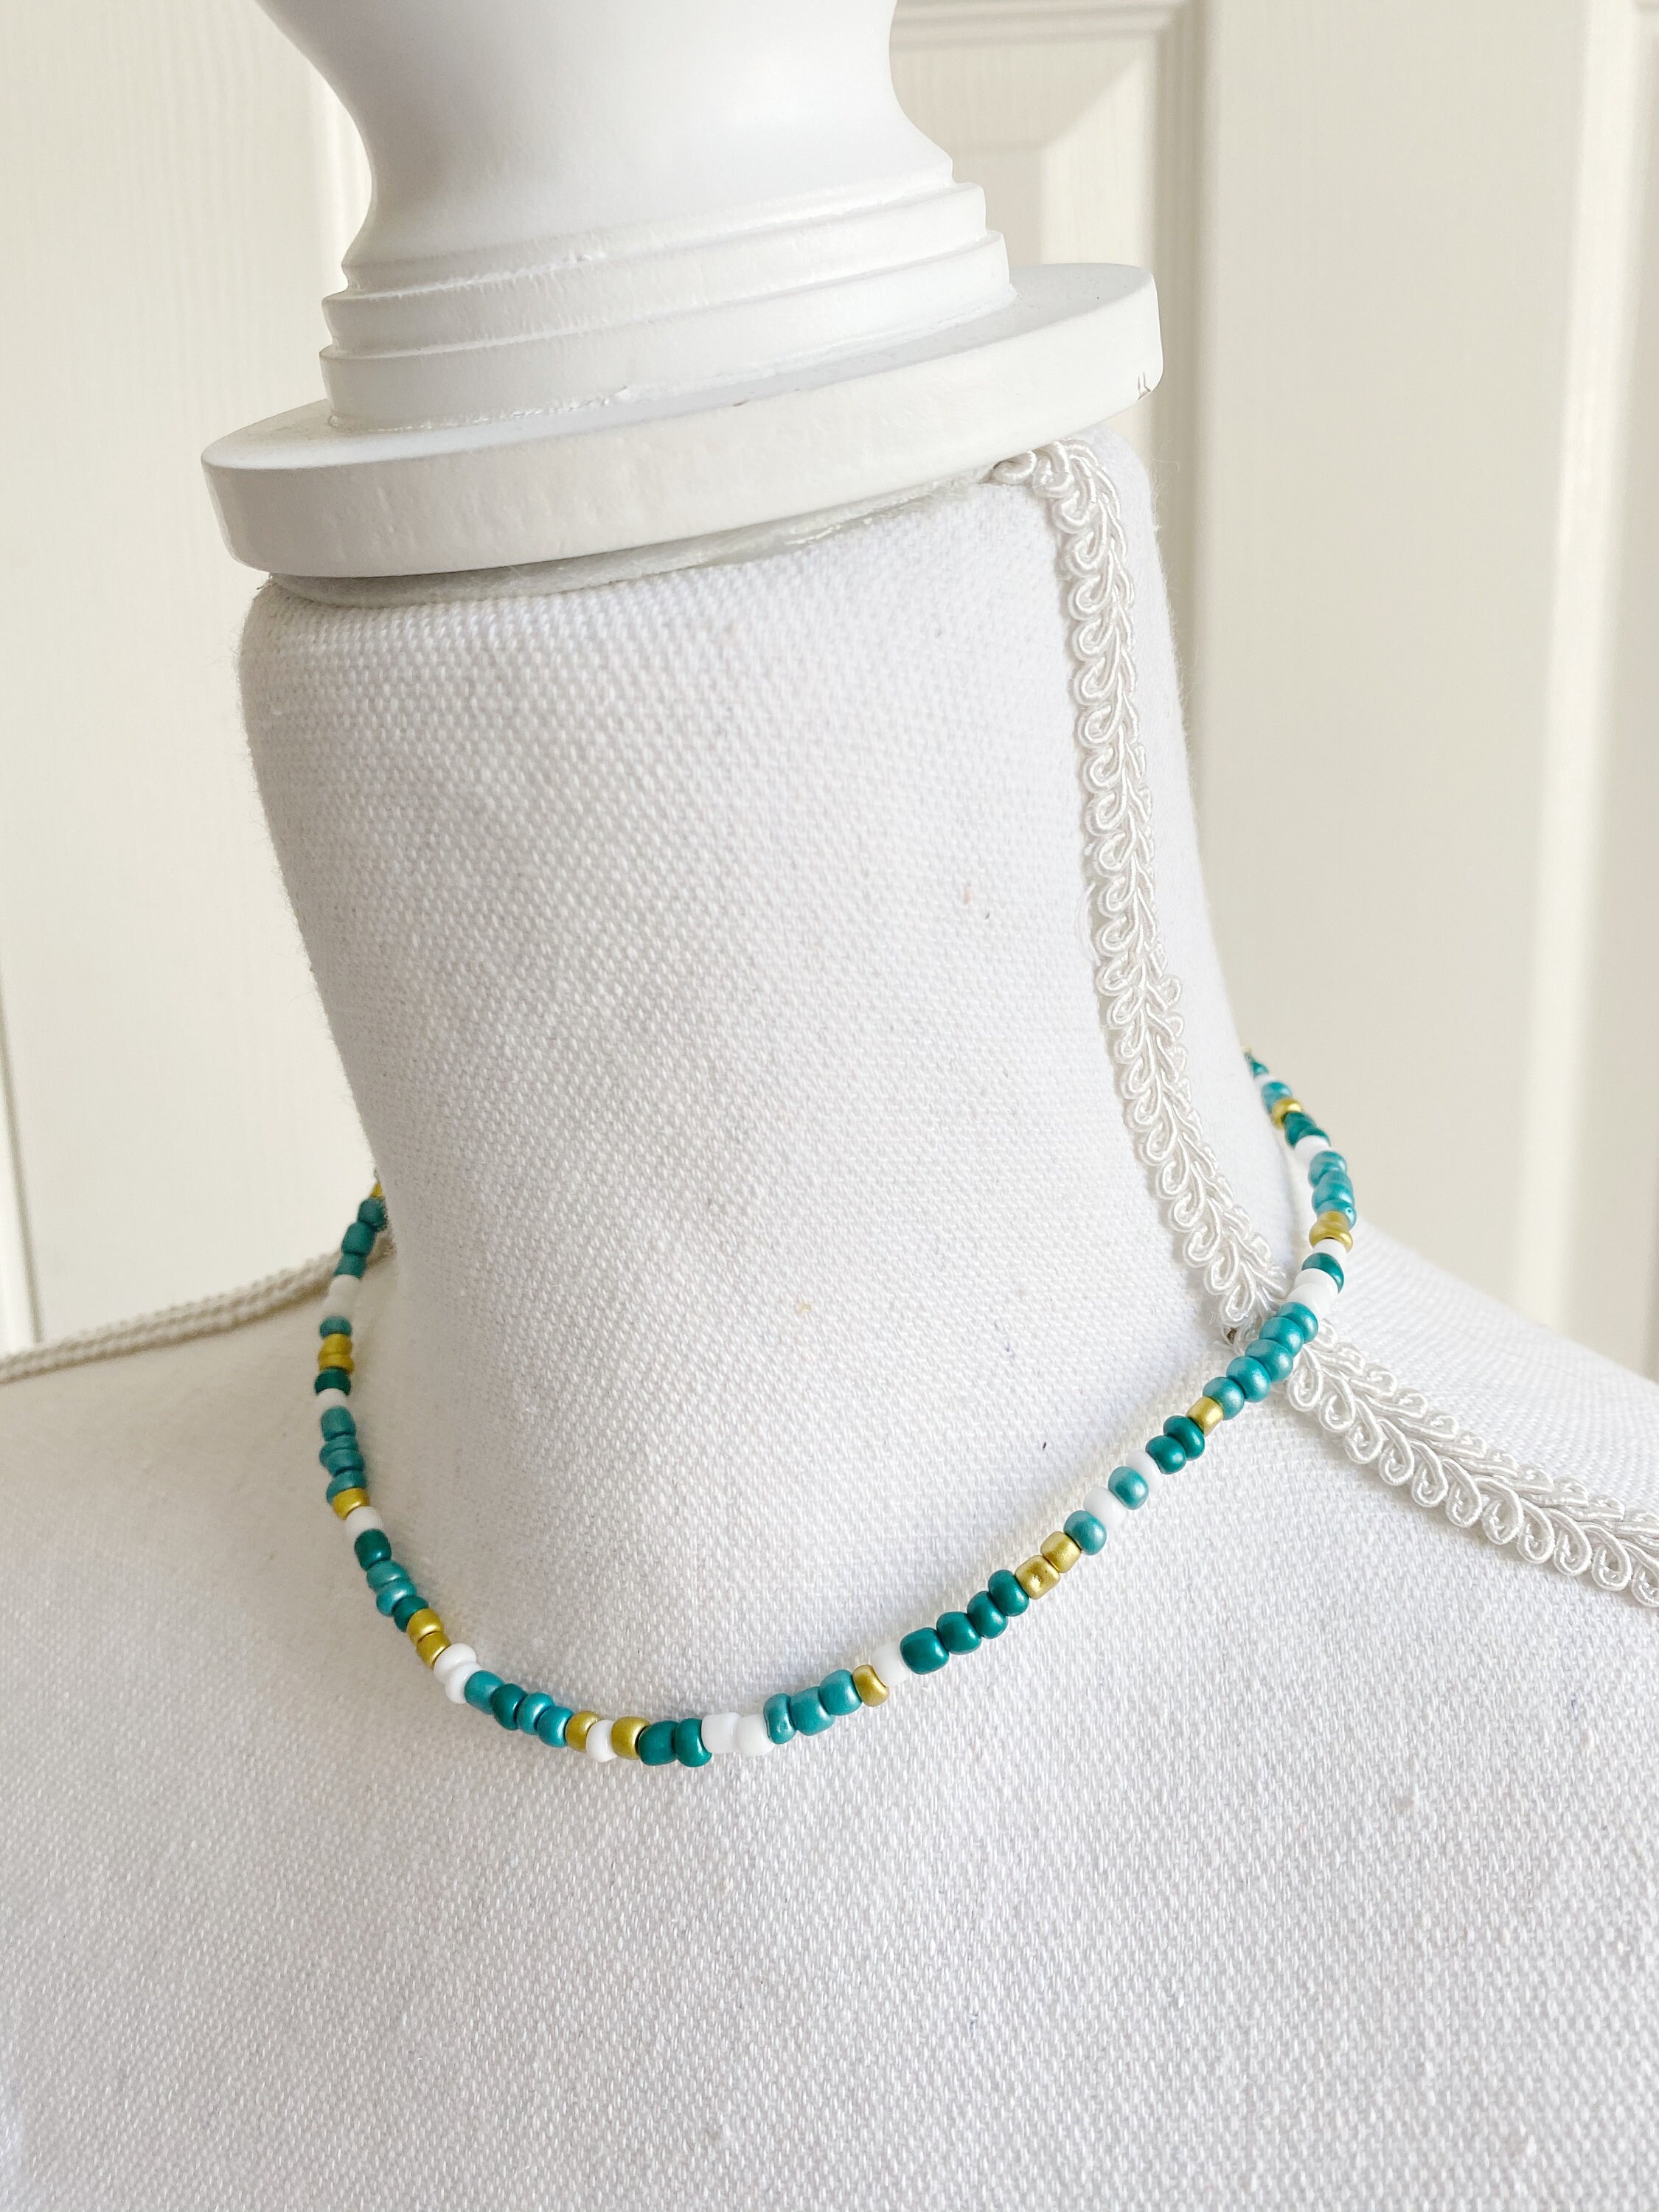 Teal White Gold Shimmer Dainty Beaded Seed Bead Choker | Etsy